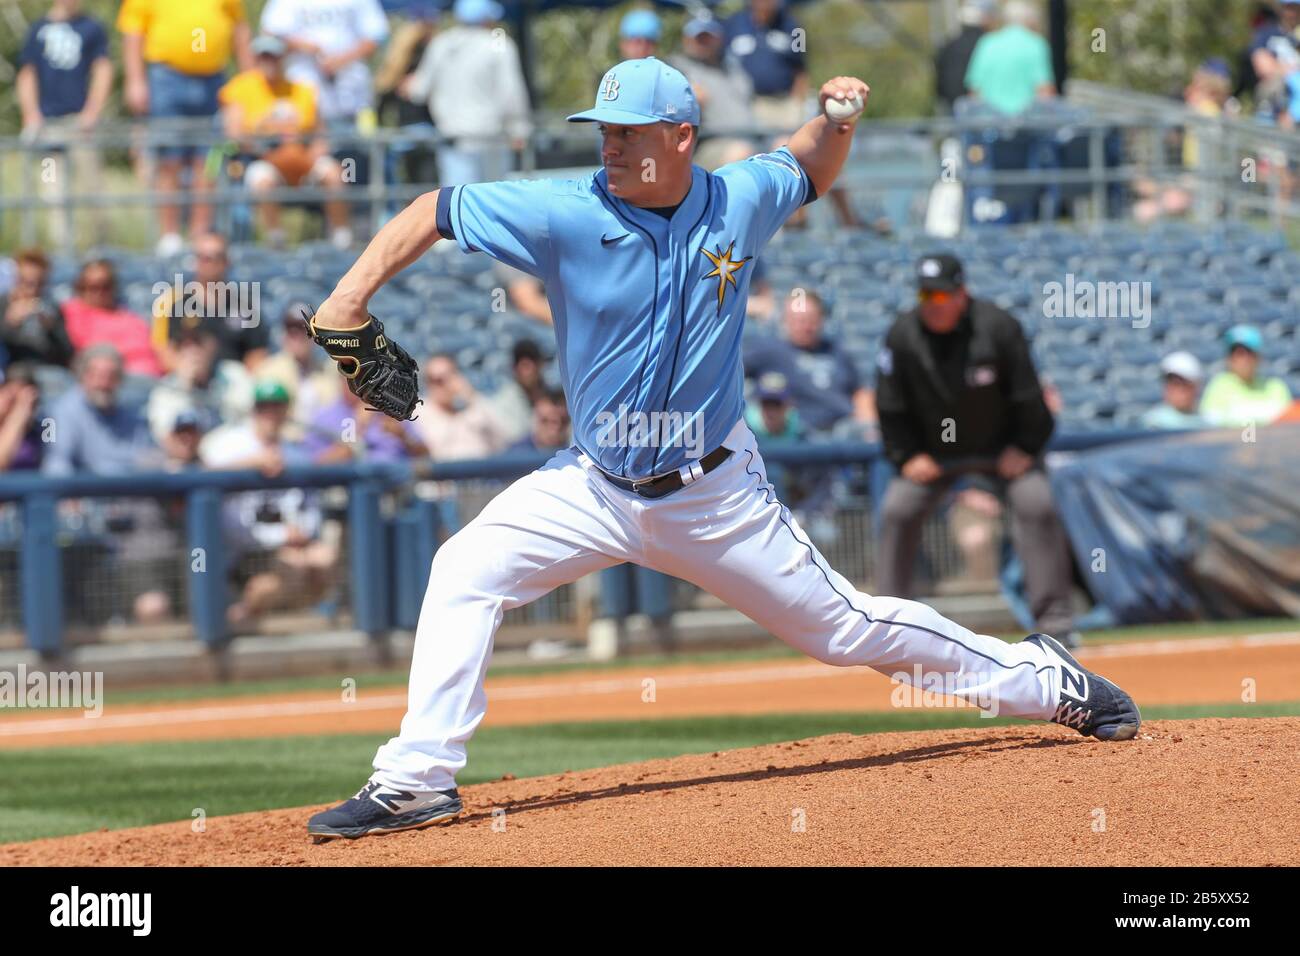 vleugel Of anders influenza Tampa Bay Rays relief pitcher Aaron Loup (15) delivers a pitch during a spring  training baseball game against the Pittsburgh Pirates, Sunday, March 8, 2020,  in Port Charlotte, Florida, USA. (Photo by